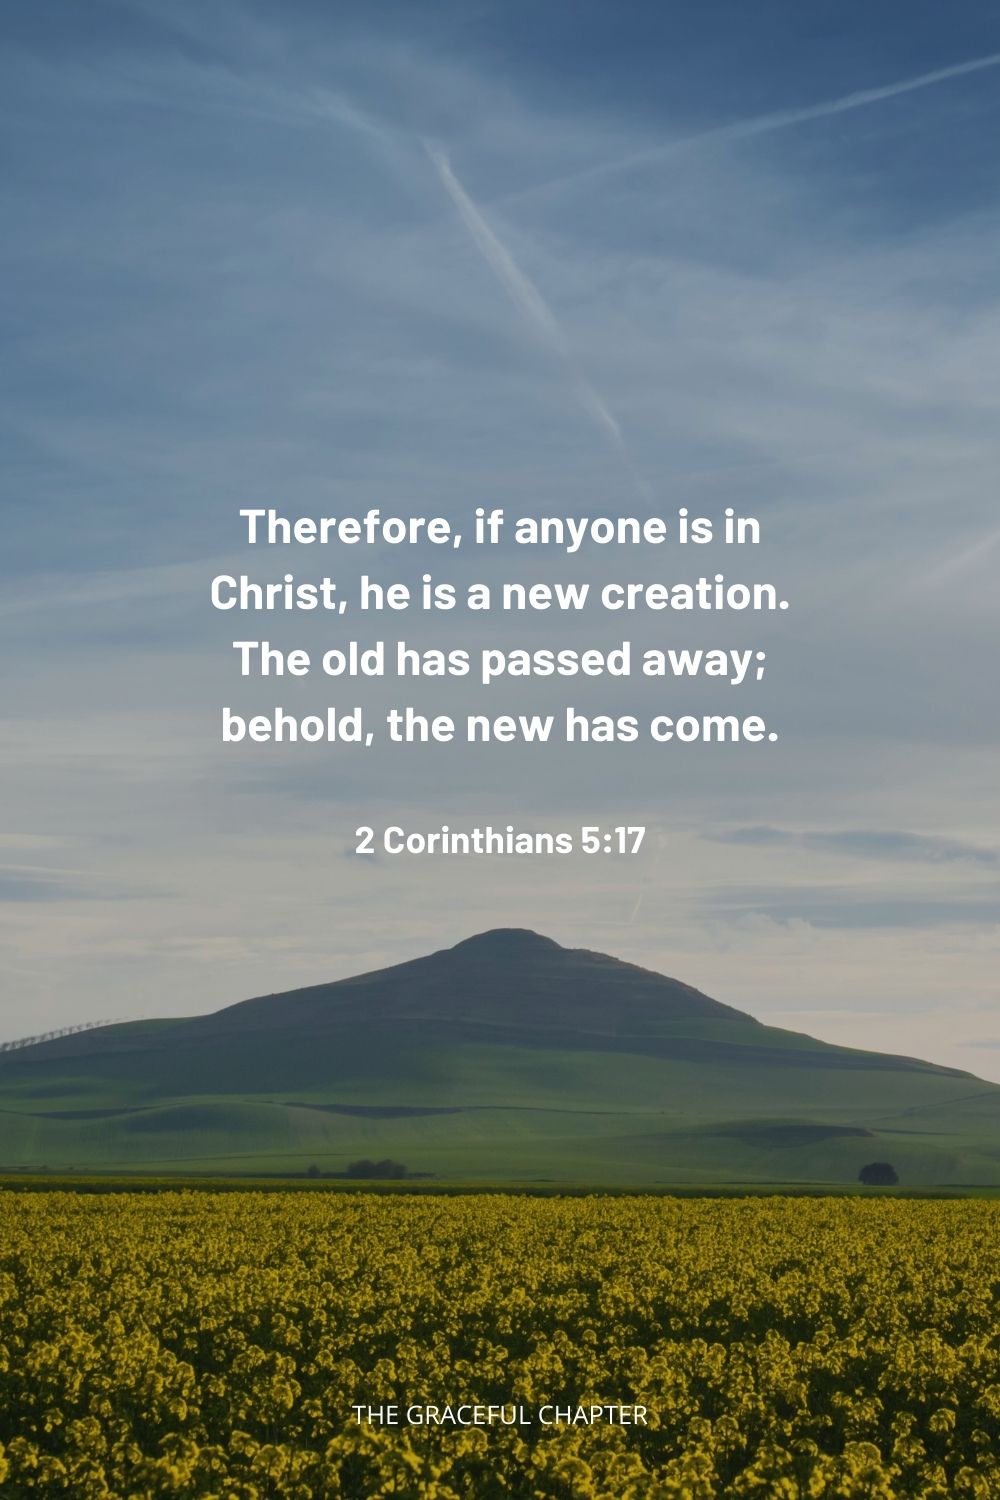  Therefore, if anyone is in Christ, he is a new creation. The old has passed away; behold, the new has come. 2 Corinthians 5:17